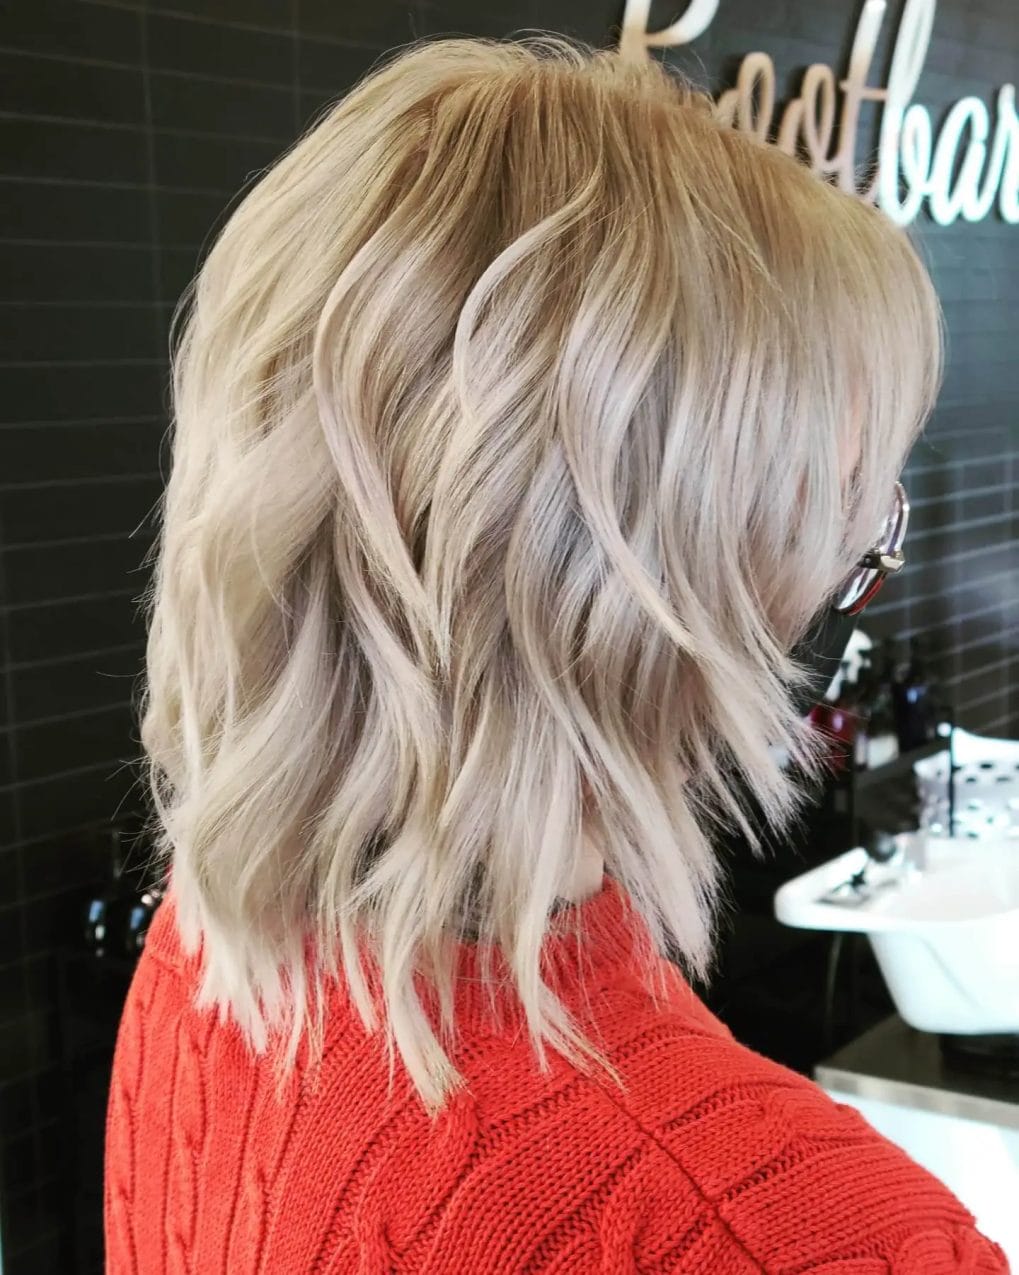 Blond wavy bixie with textured layers adding depth and dimension.